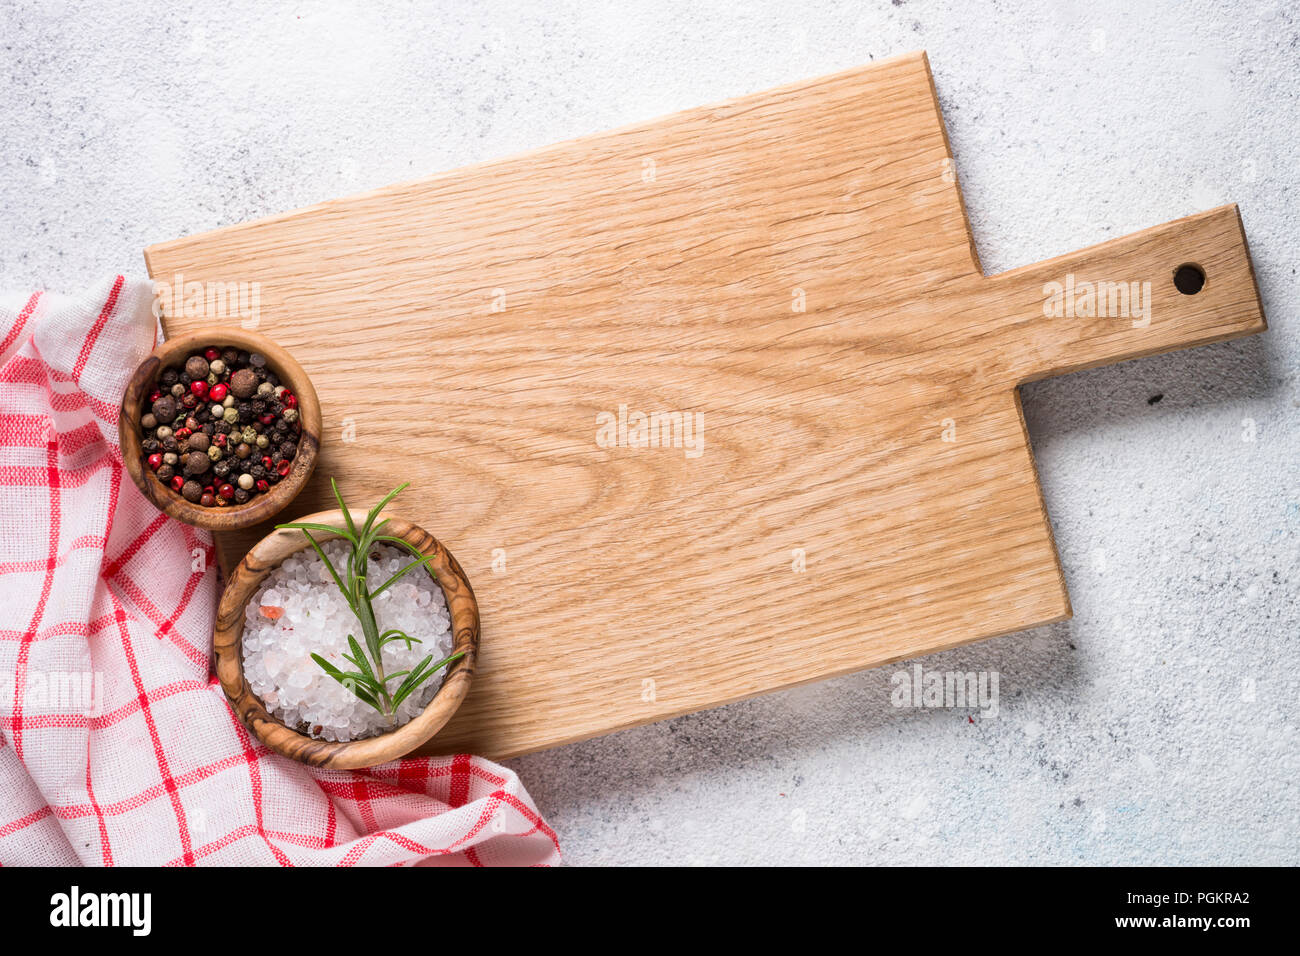 Empty wooden cutting board and tablecloth on white stone table. Stock Photo